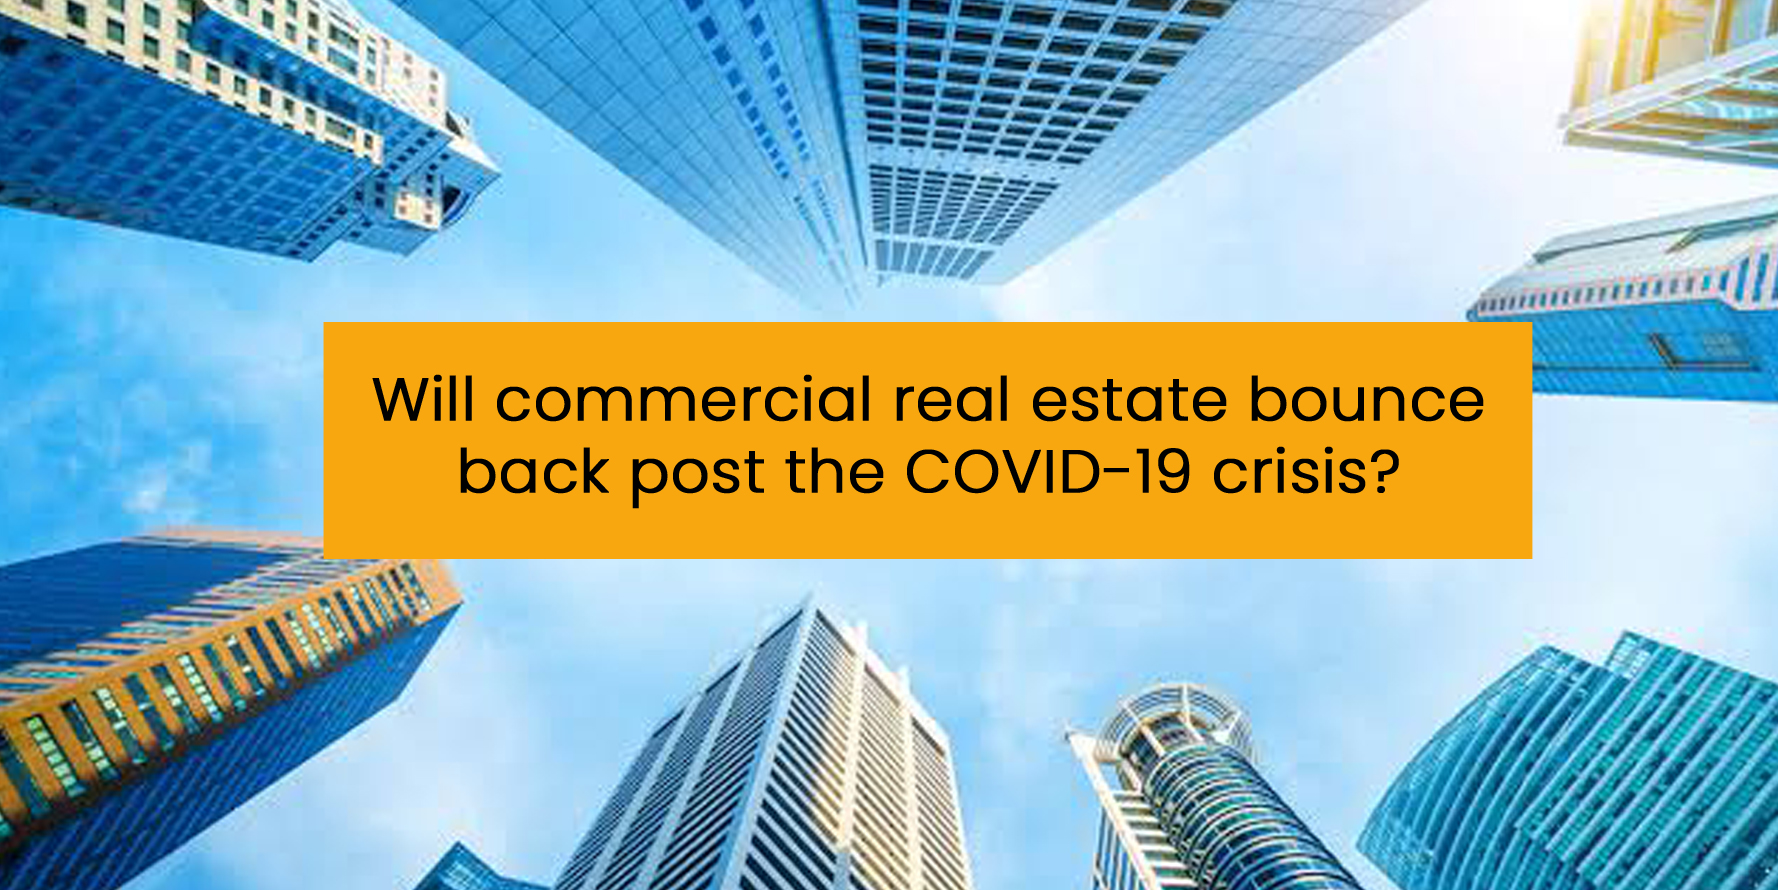 Will commercial real estate bounce back post the COVID-19 crisis?